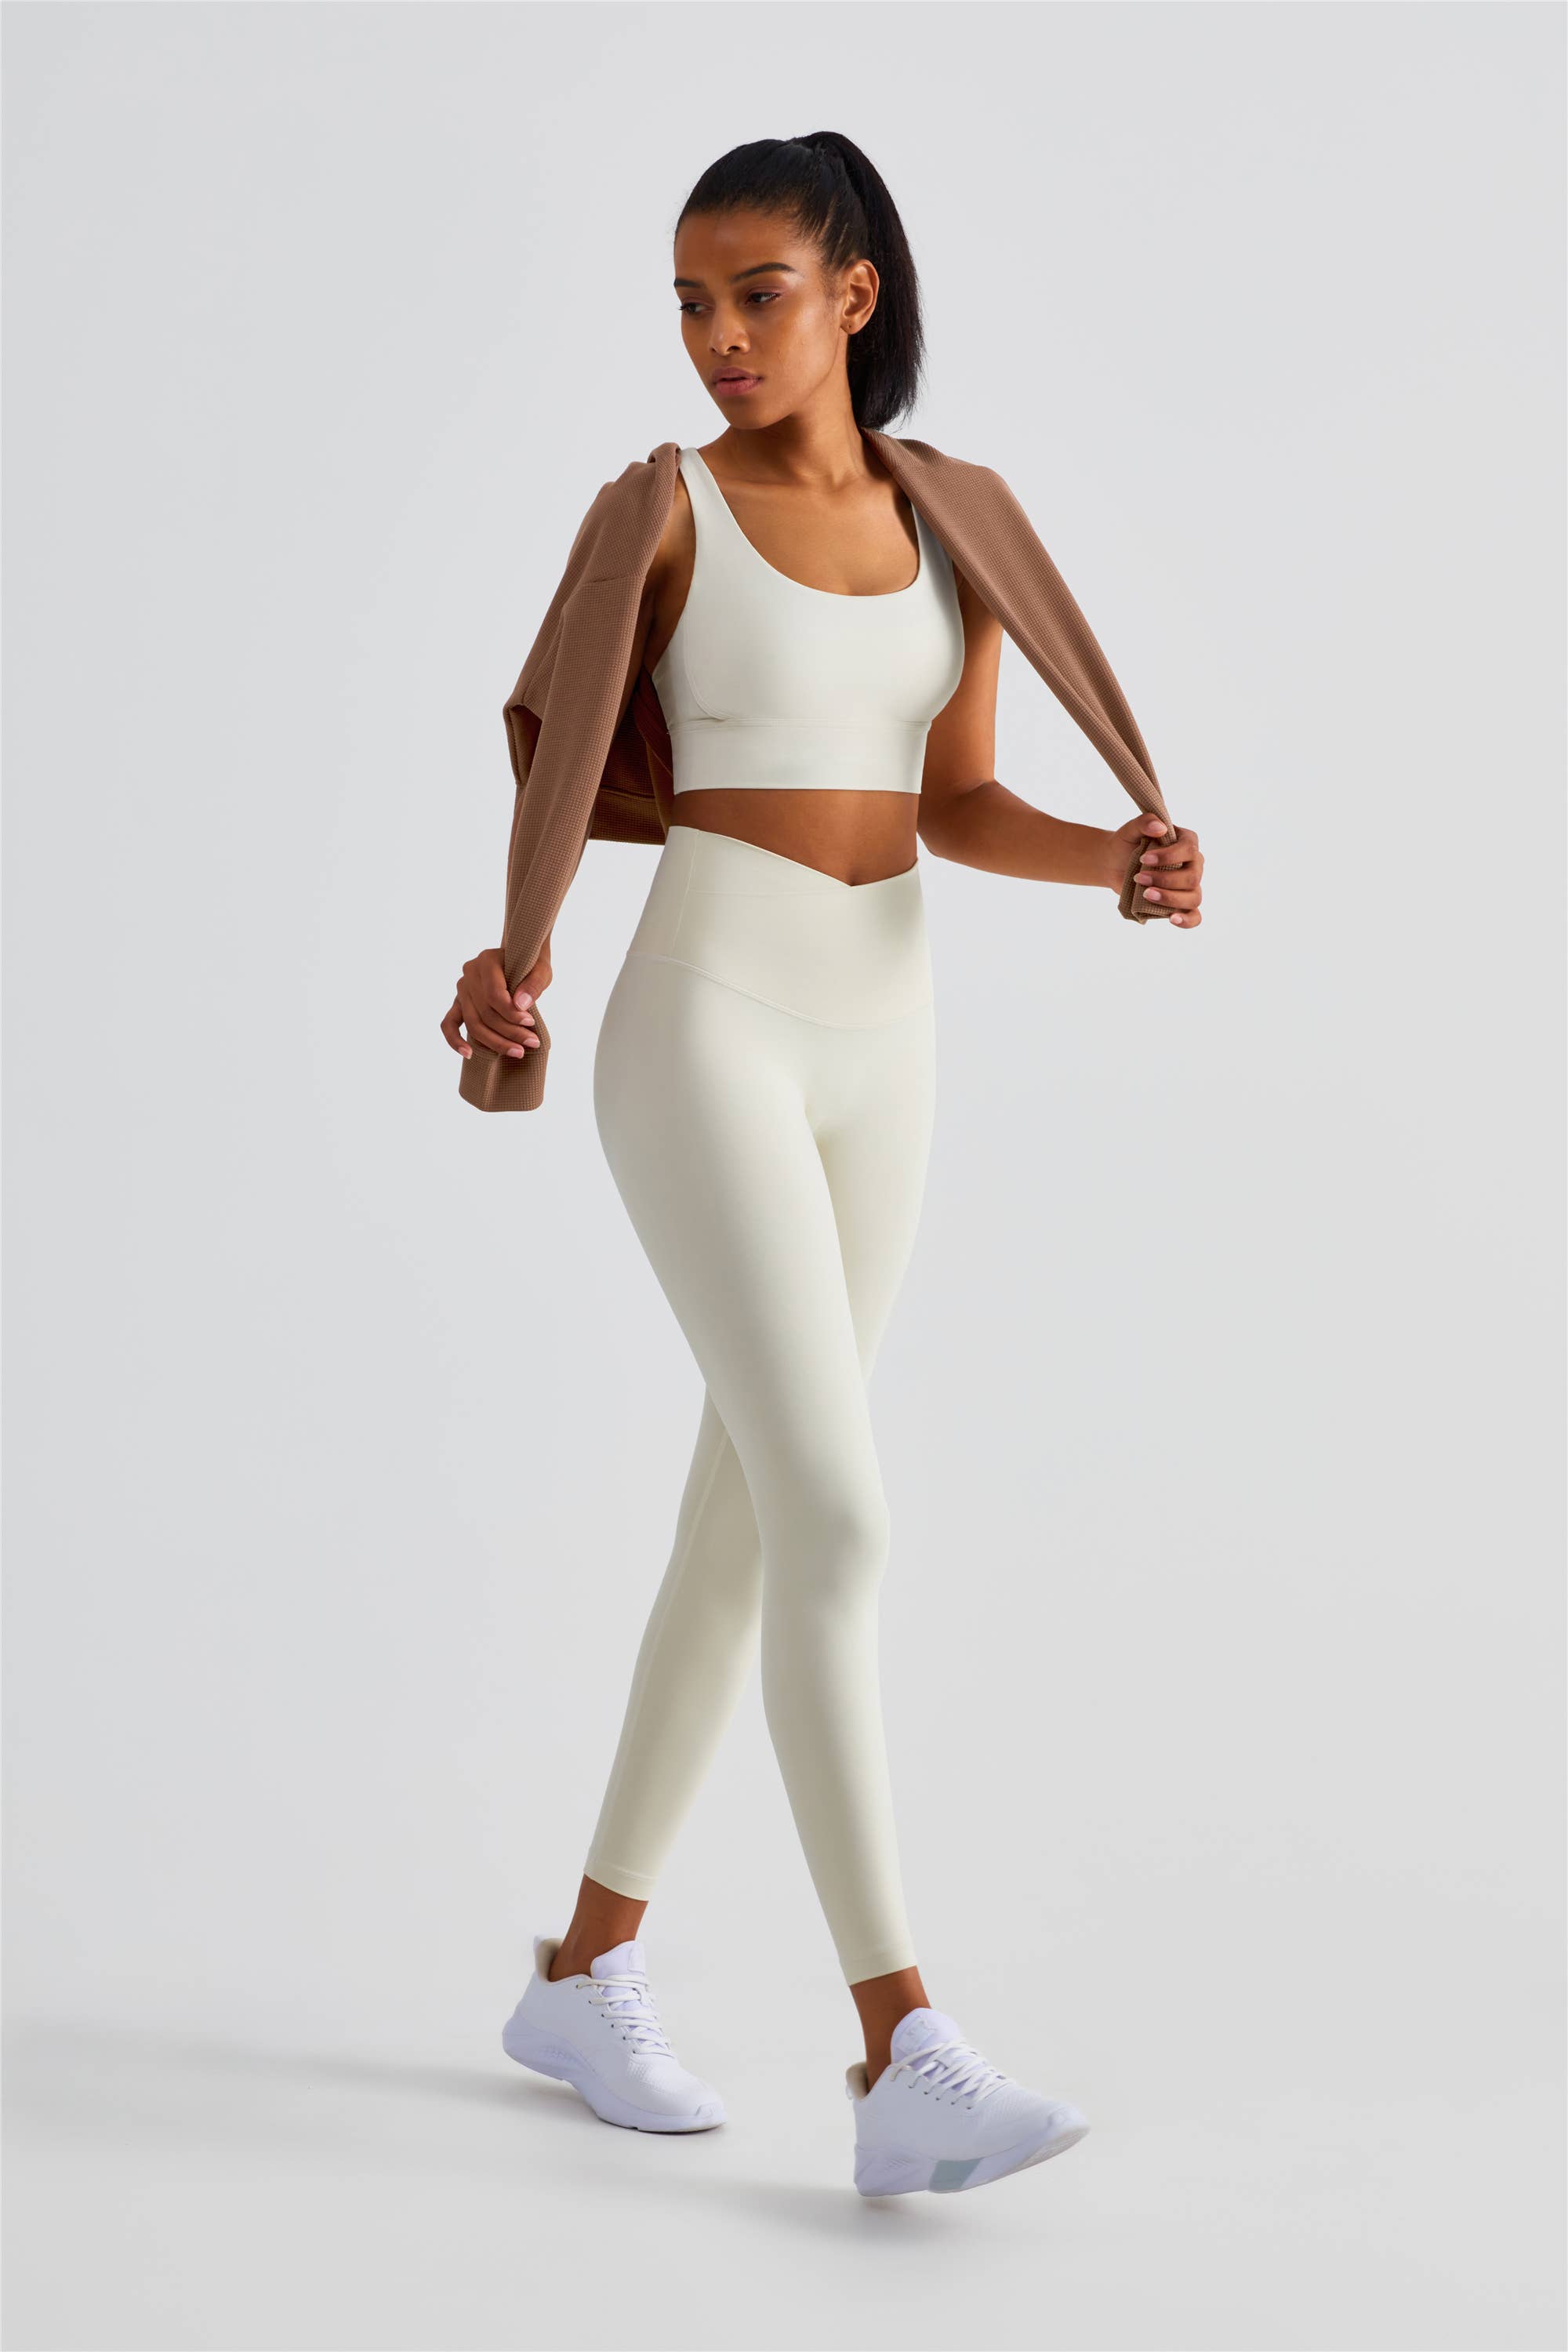 Here's How You Brand Your Leggings For Your Private Label! - Gym Apparels:  The Best Collection Of Wholesale Gym Clothes